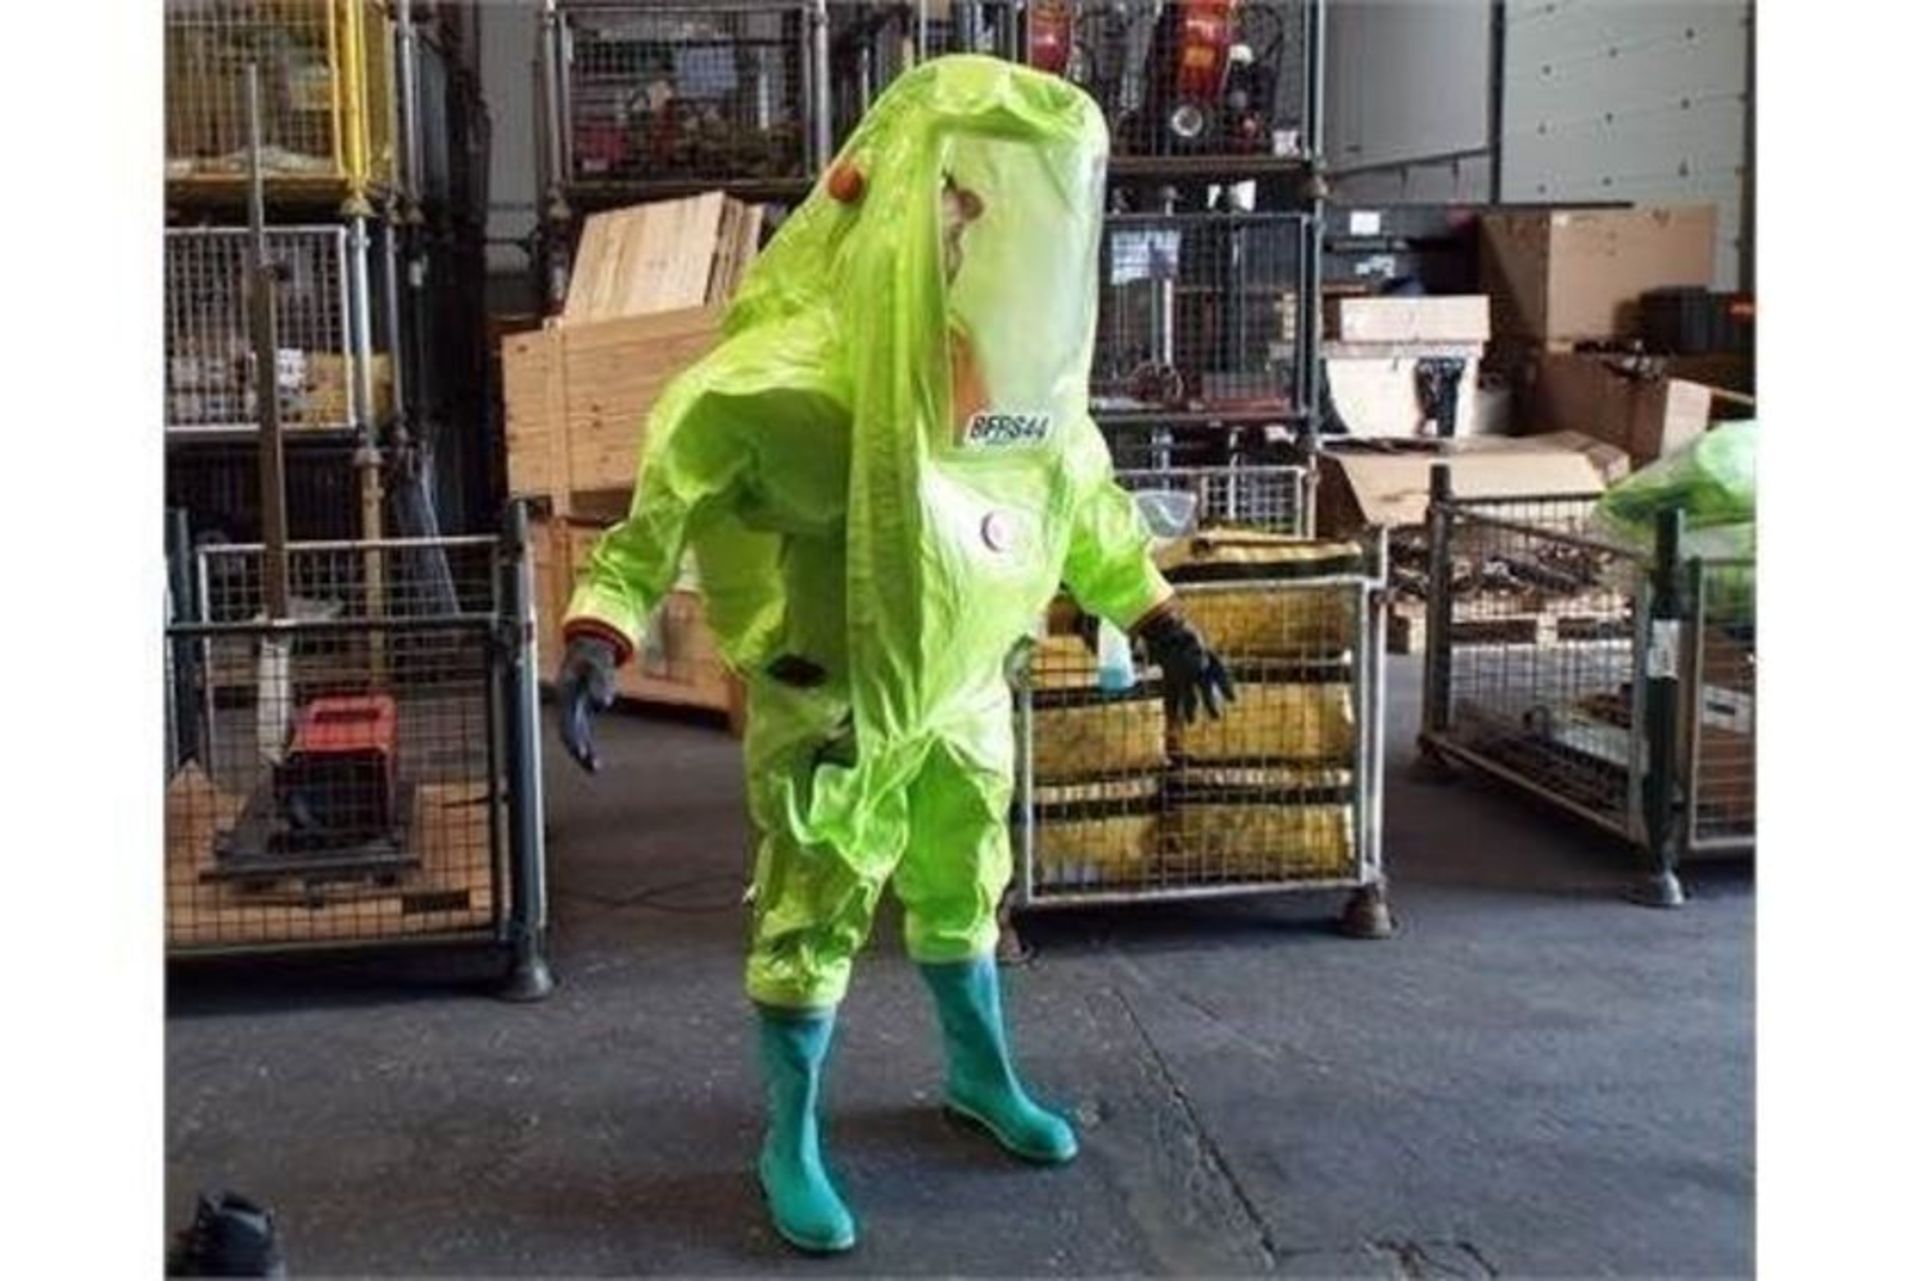 10 x Respirex Tychem TK Gas-Tight Hazmat Suit Type 1A with Attached Boots and Gloves - Image 4 of 11